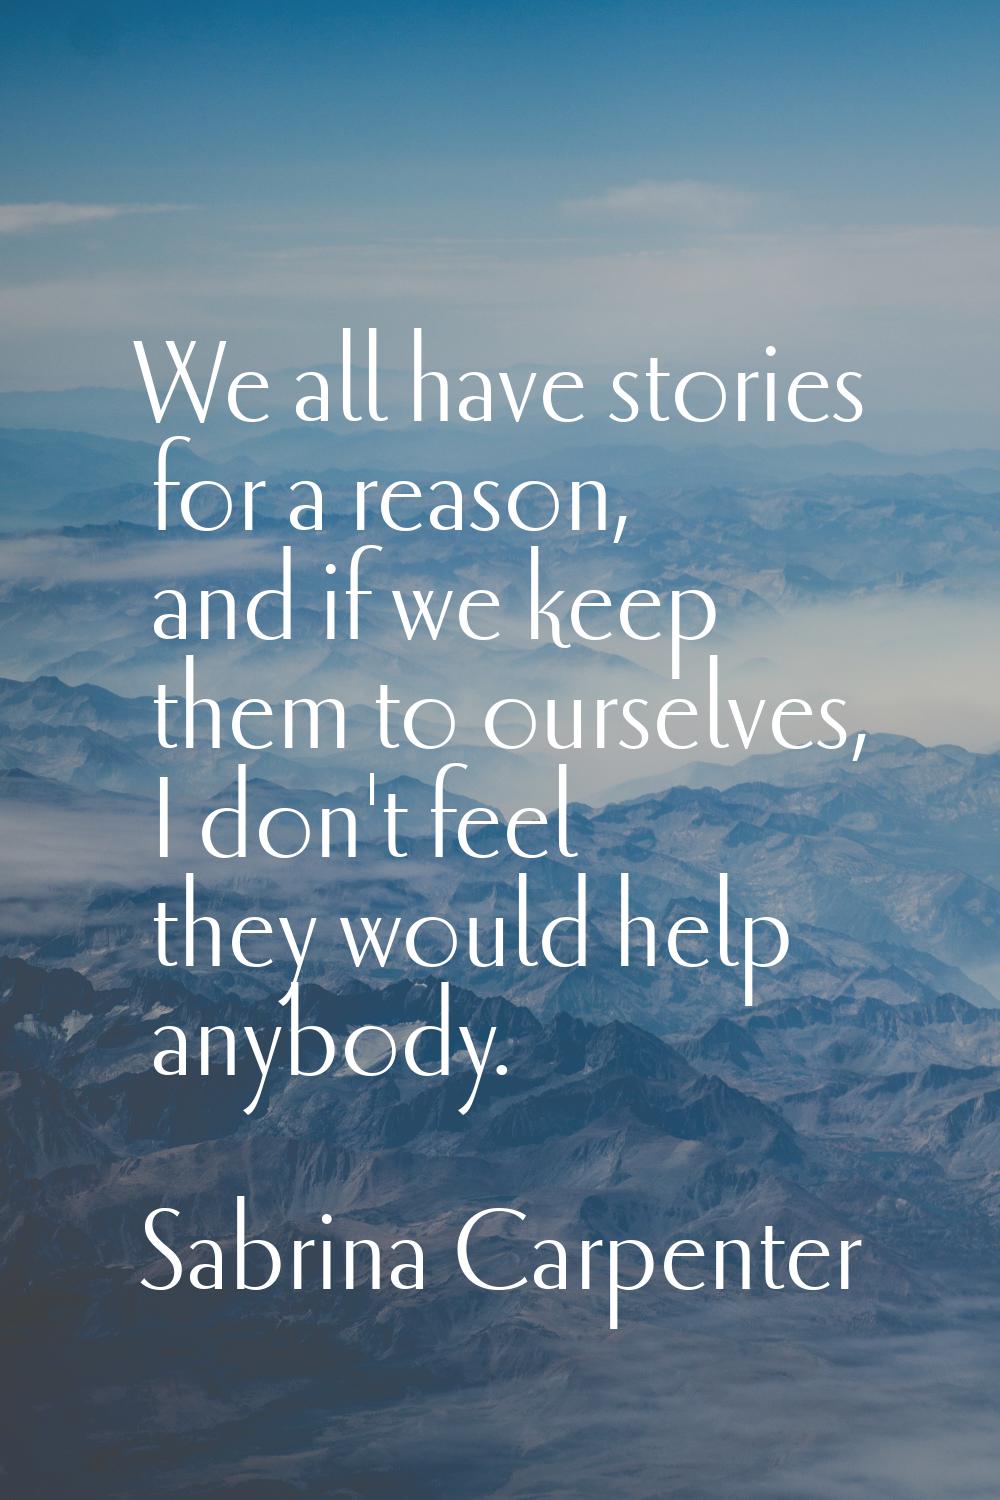 We all have stories for a reason, and if we keep them to ourselves, I don't feel they would help an